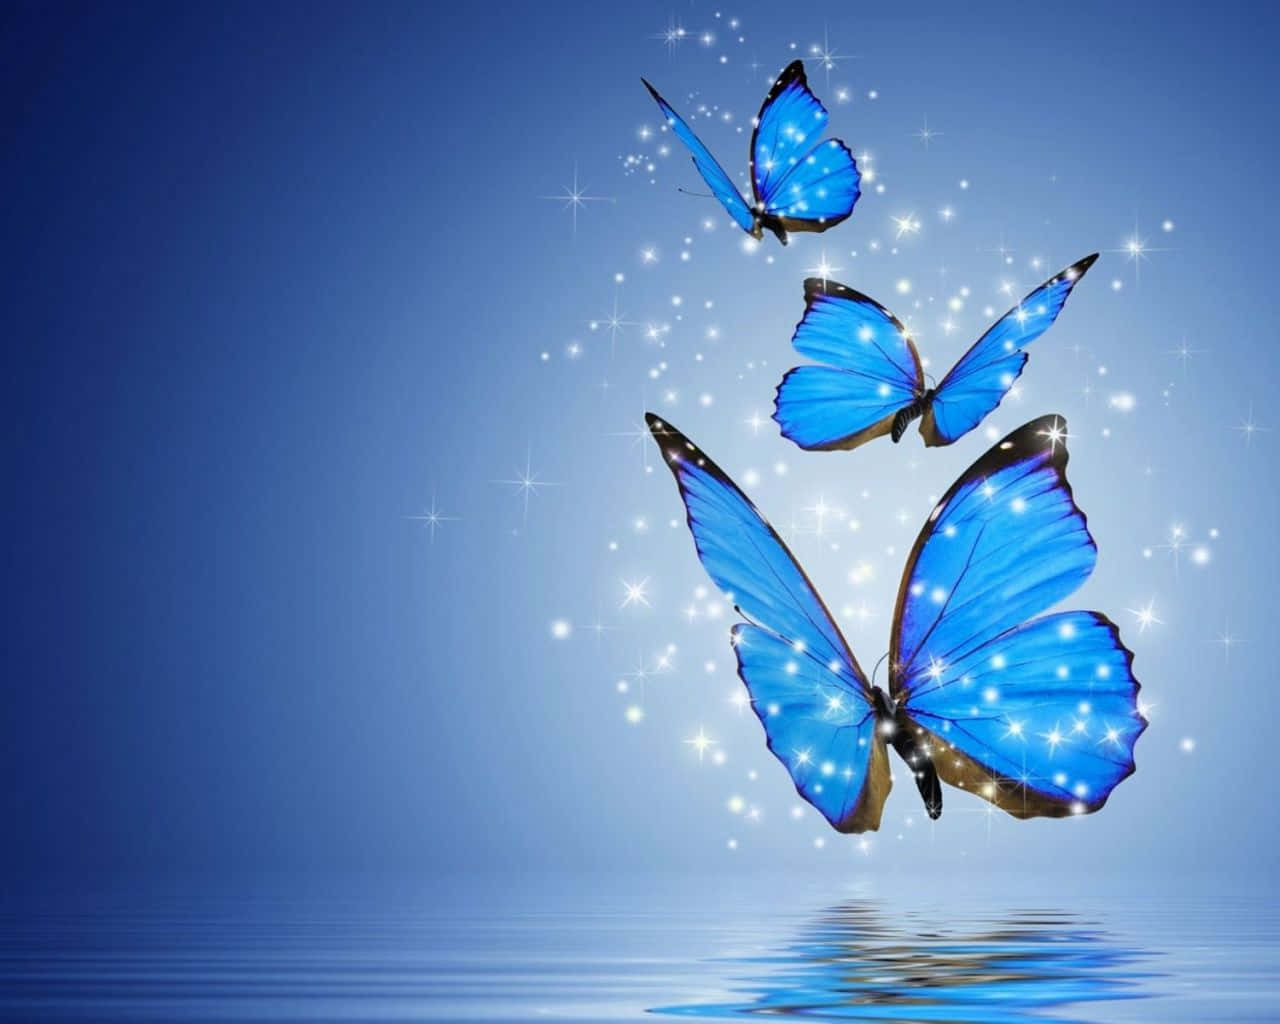 Enchanting Aesthetic Butterfly Background